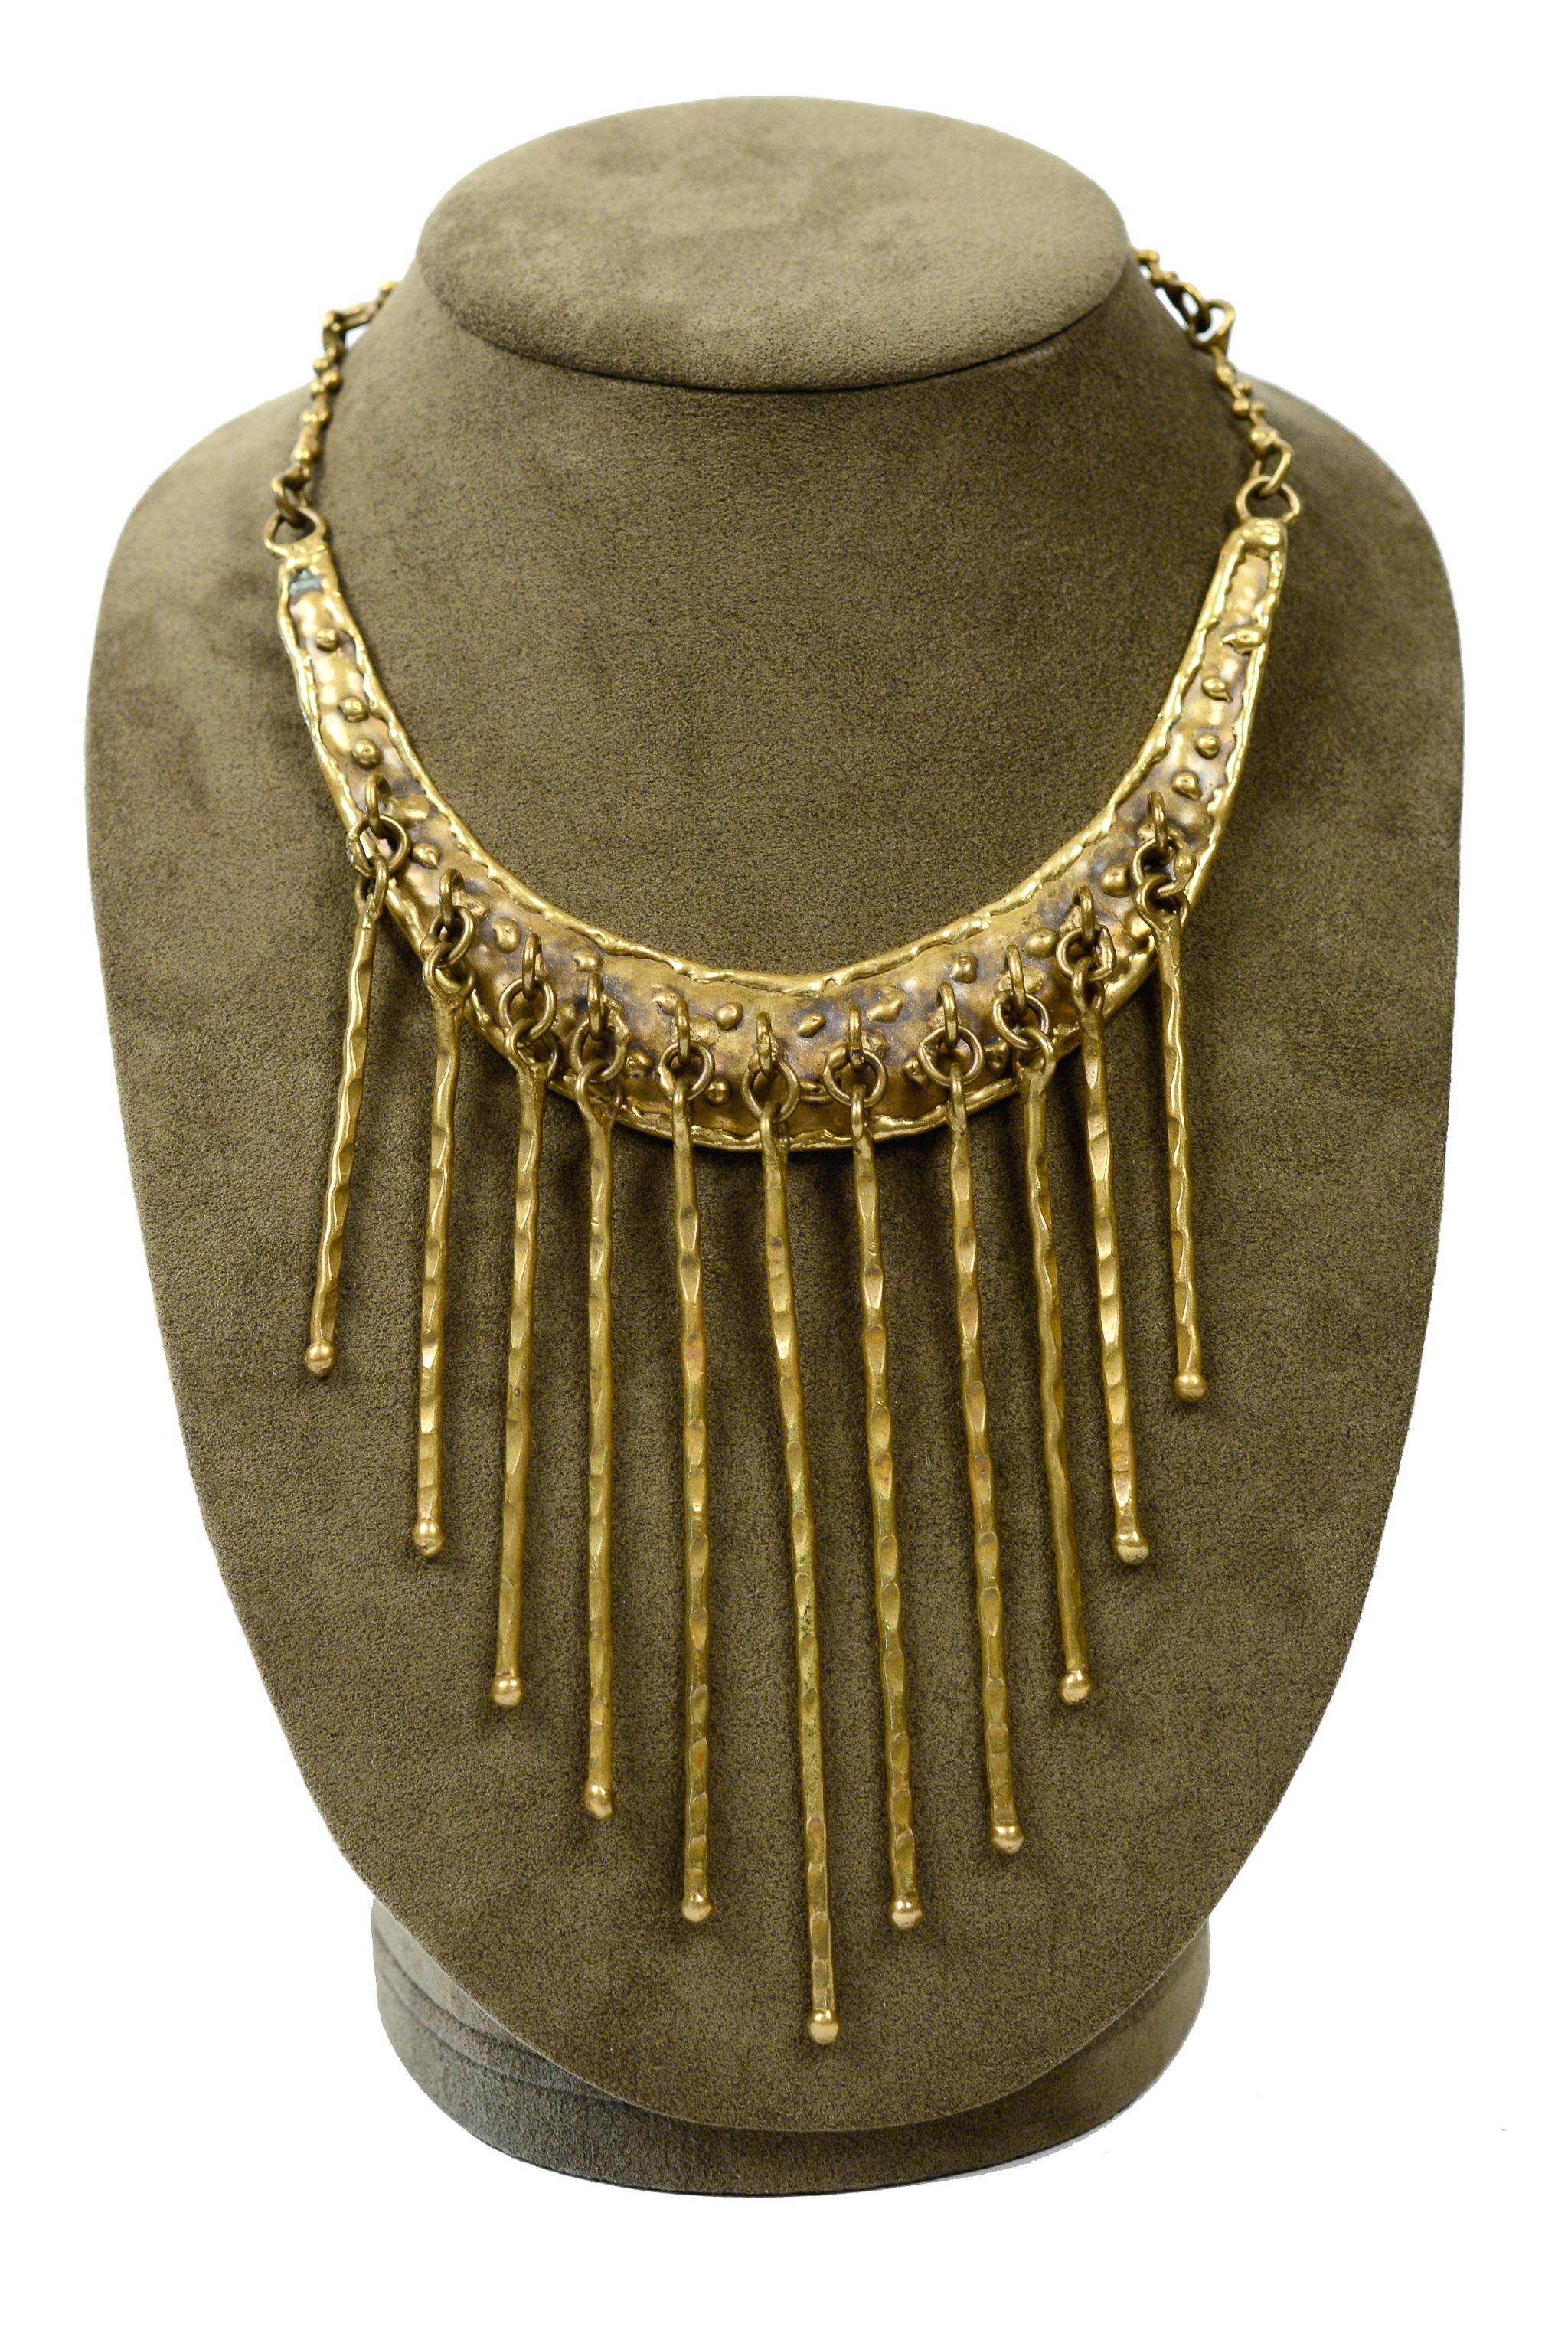 Resurrection Vintage is excited to offer a vintage Pal Kepenyes brutalist bronze metal collar necklace with a handmade chain, metal loops, and hammered fringe.

Pal Kepenyes
One Size
Handmade
Metal
Excellent Vintage Condition
Authenticity Guaranteed 